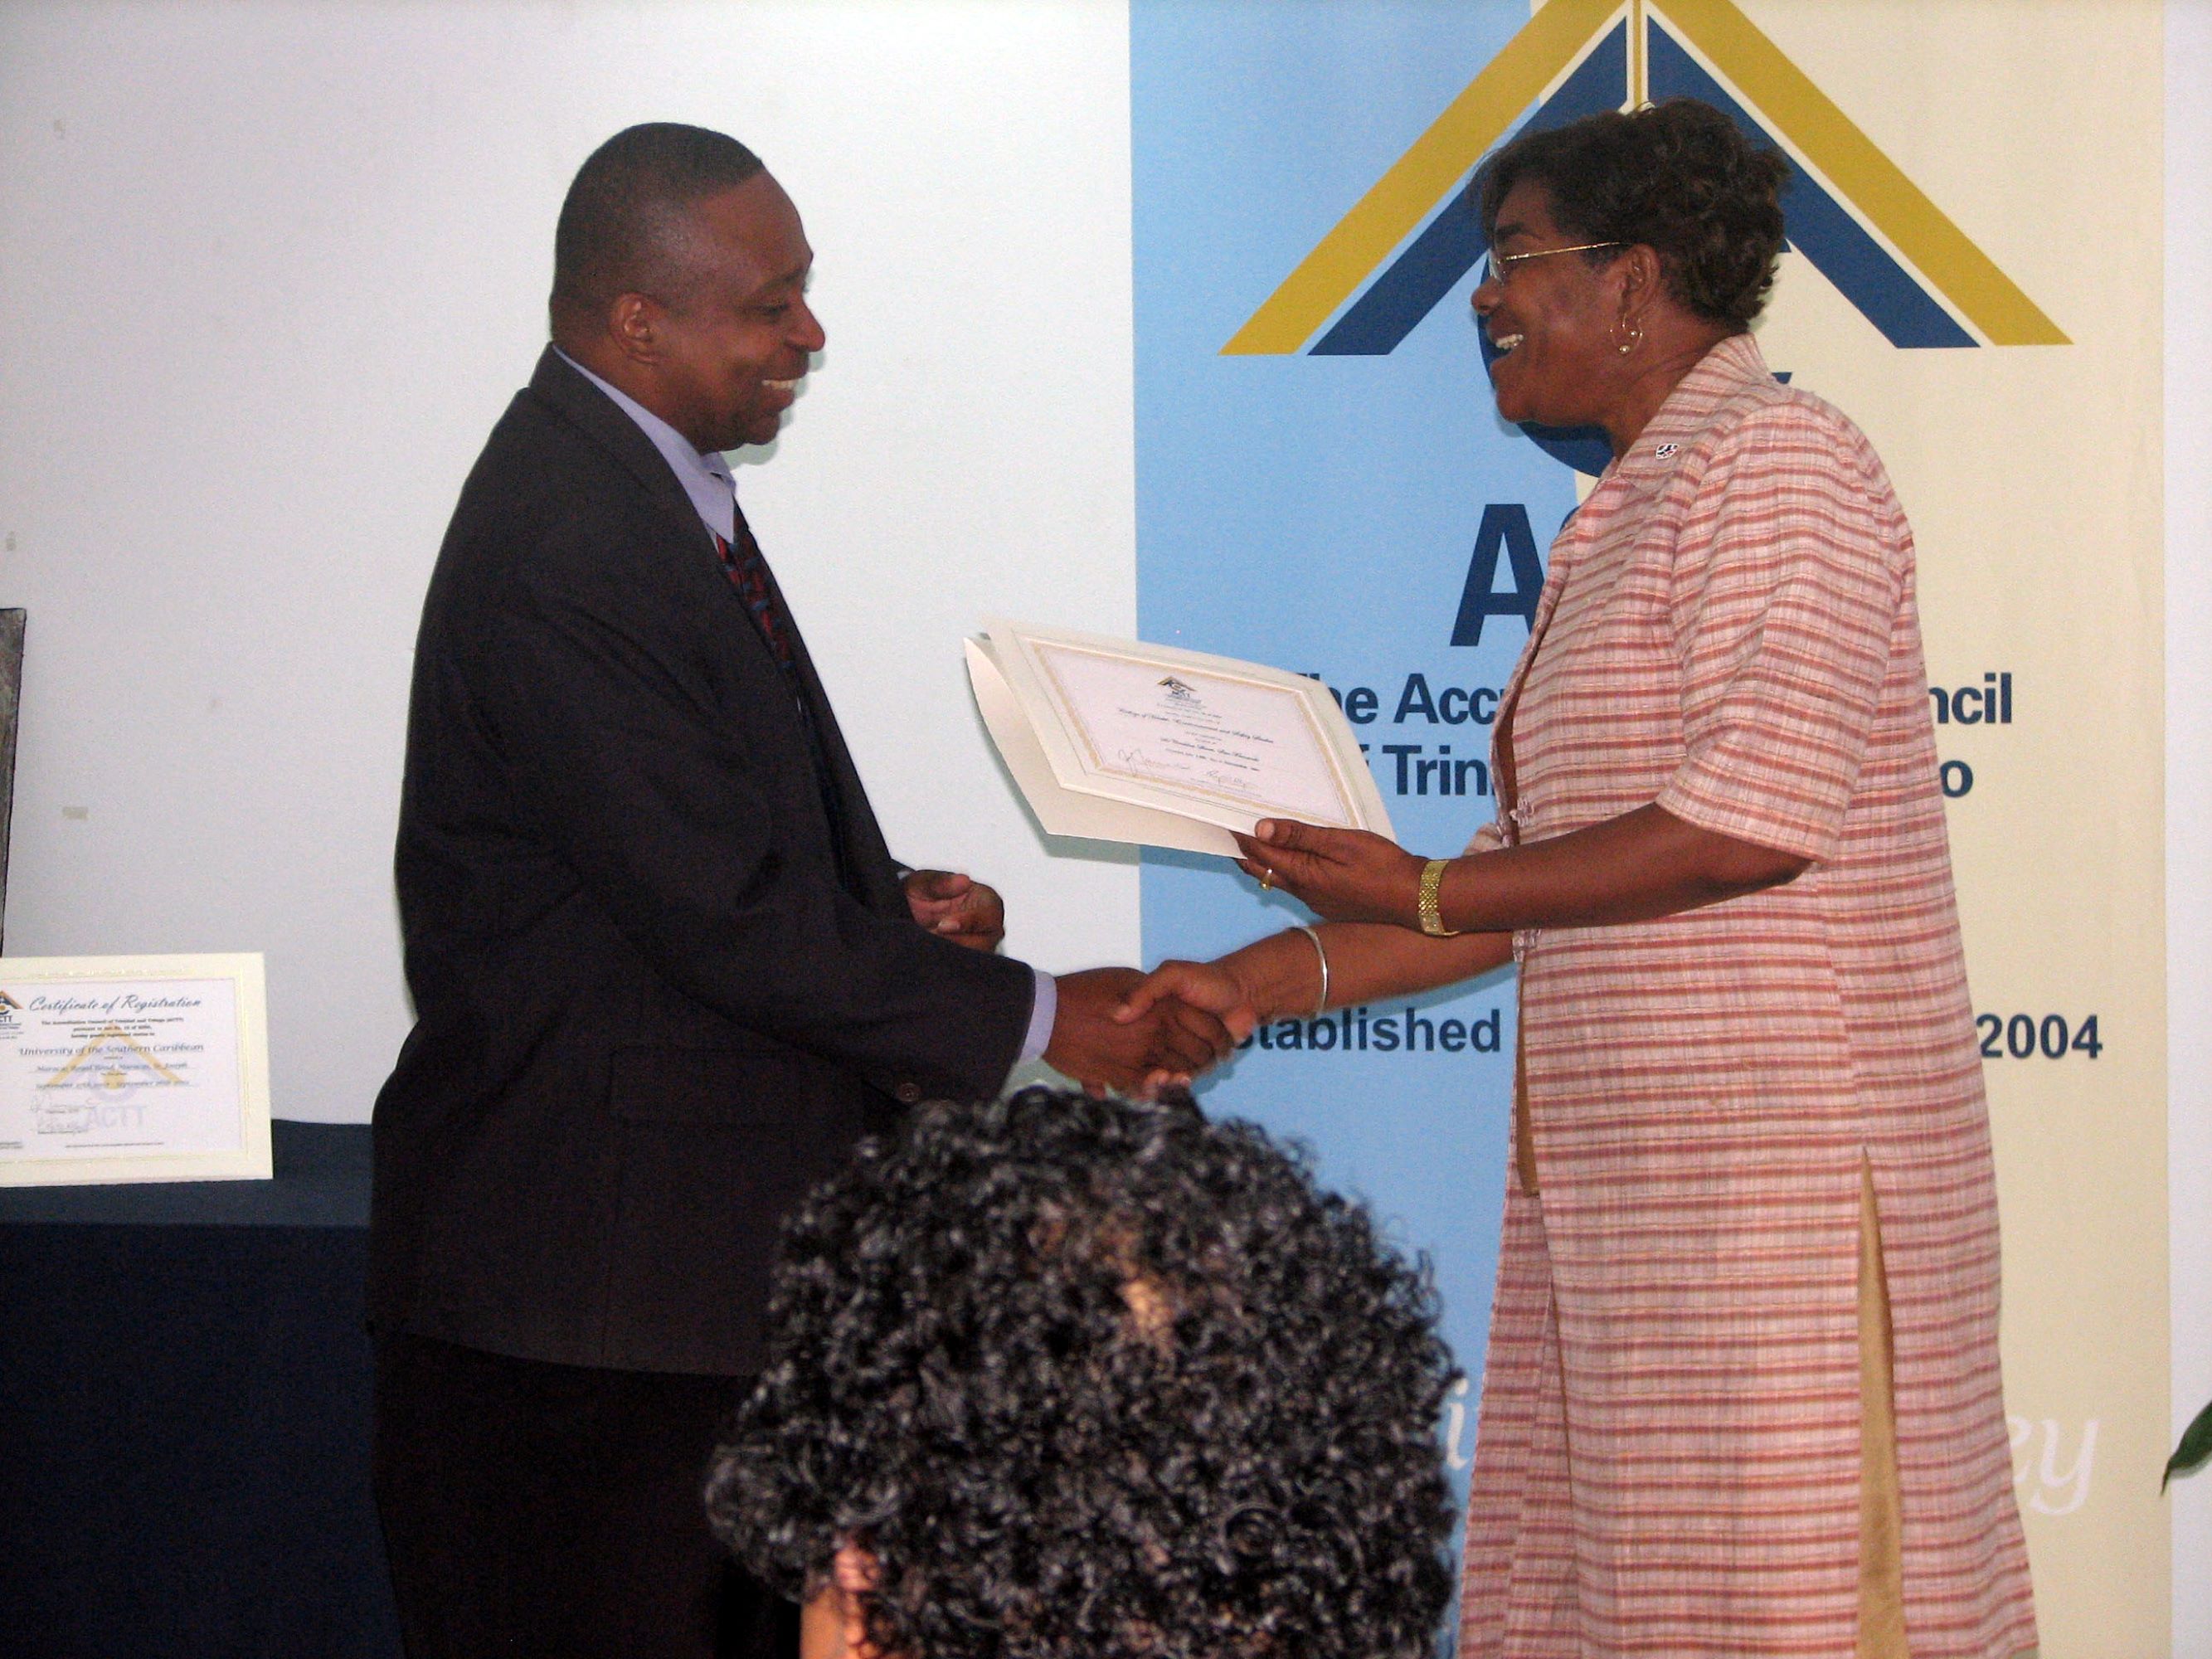 ACTT registers its first Tertiary Level Institution in Trinidad - USC.jpg